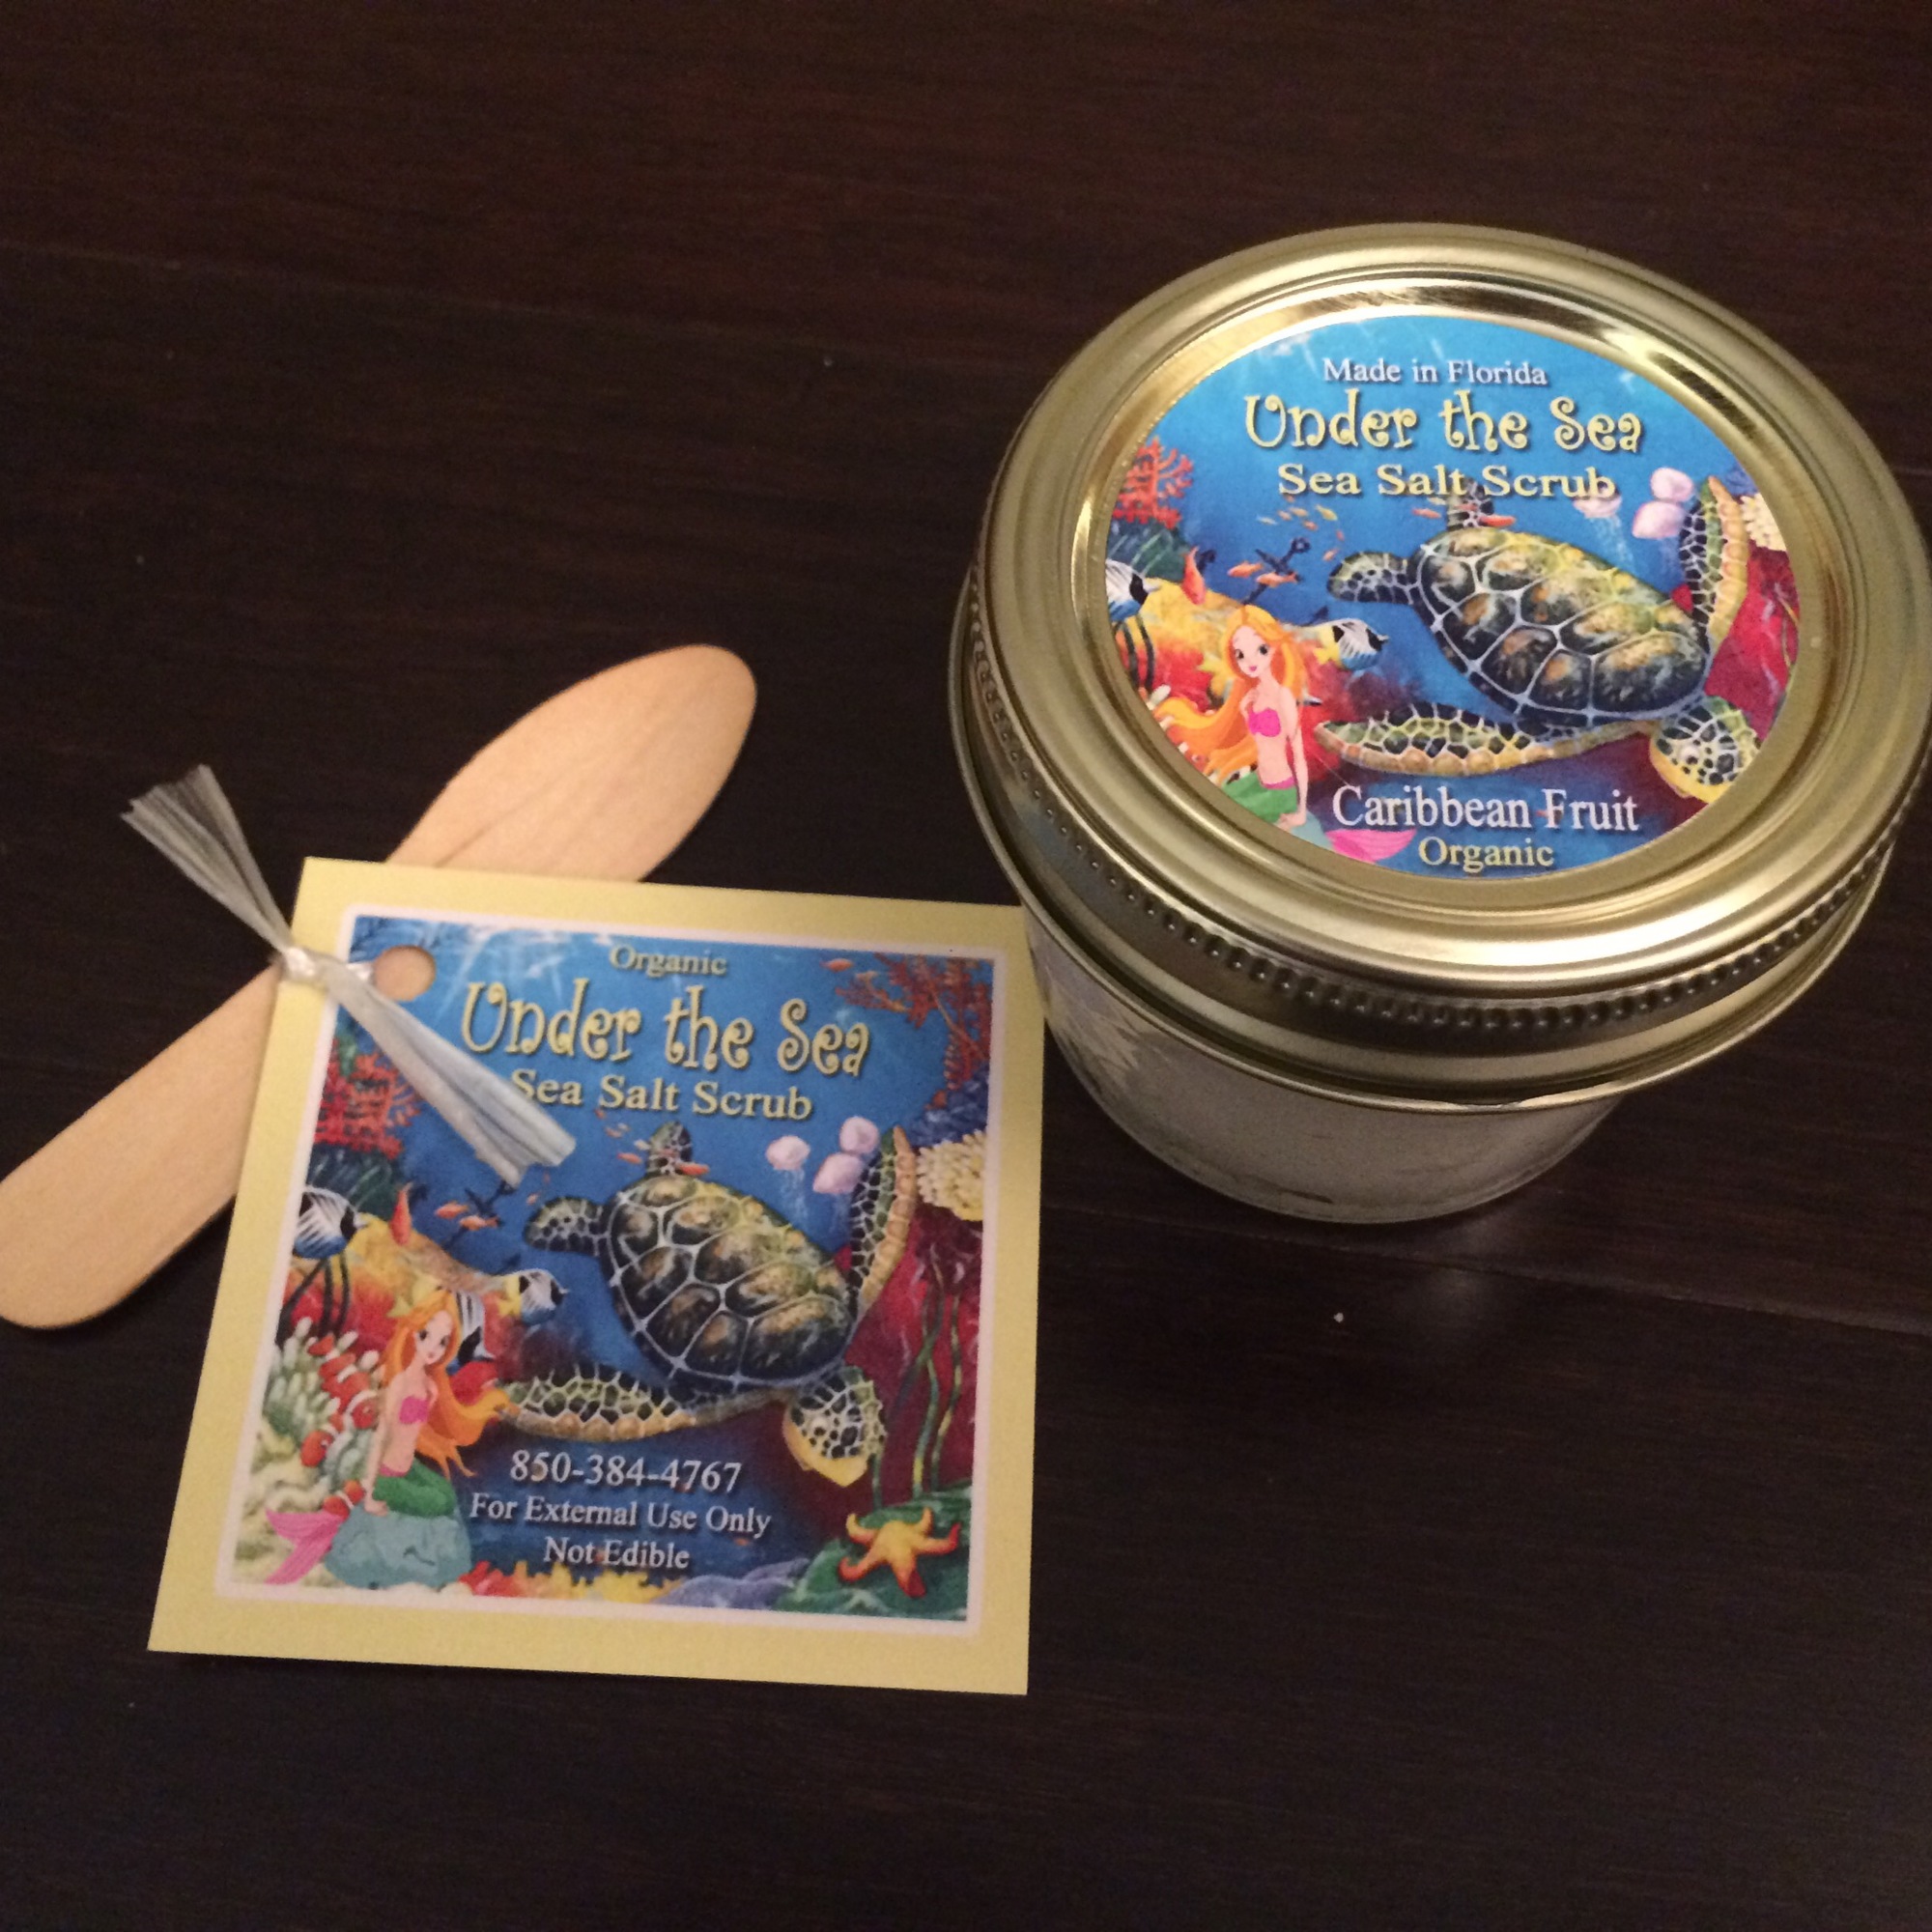 Those interested in ordering Harris’ “Under the Sea” salt-scrub products can visit, facebook.com/UndertheSea.us/